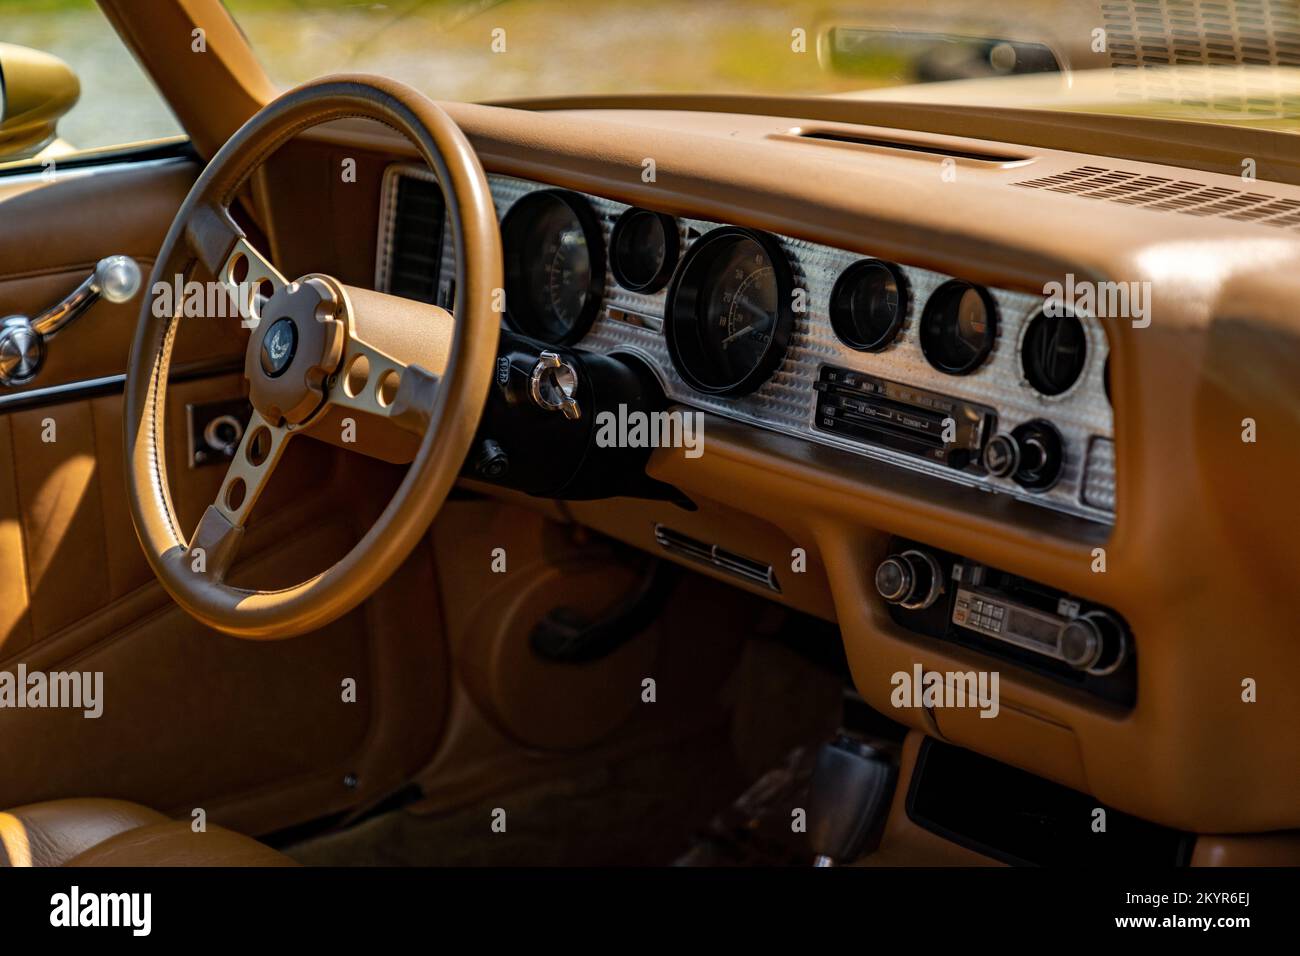 Dashboard and instrument panel of a Second-Generation Pontiac Firebird Trans Am in camel tan interior Stock Photo